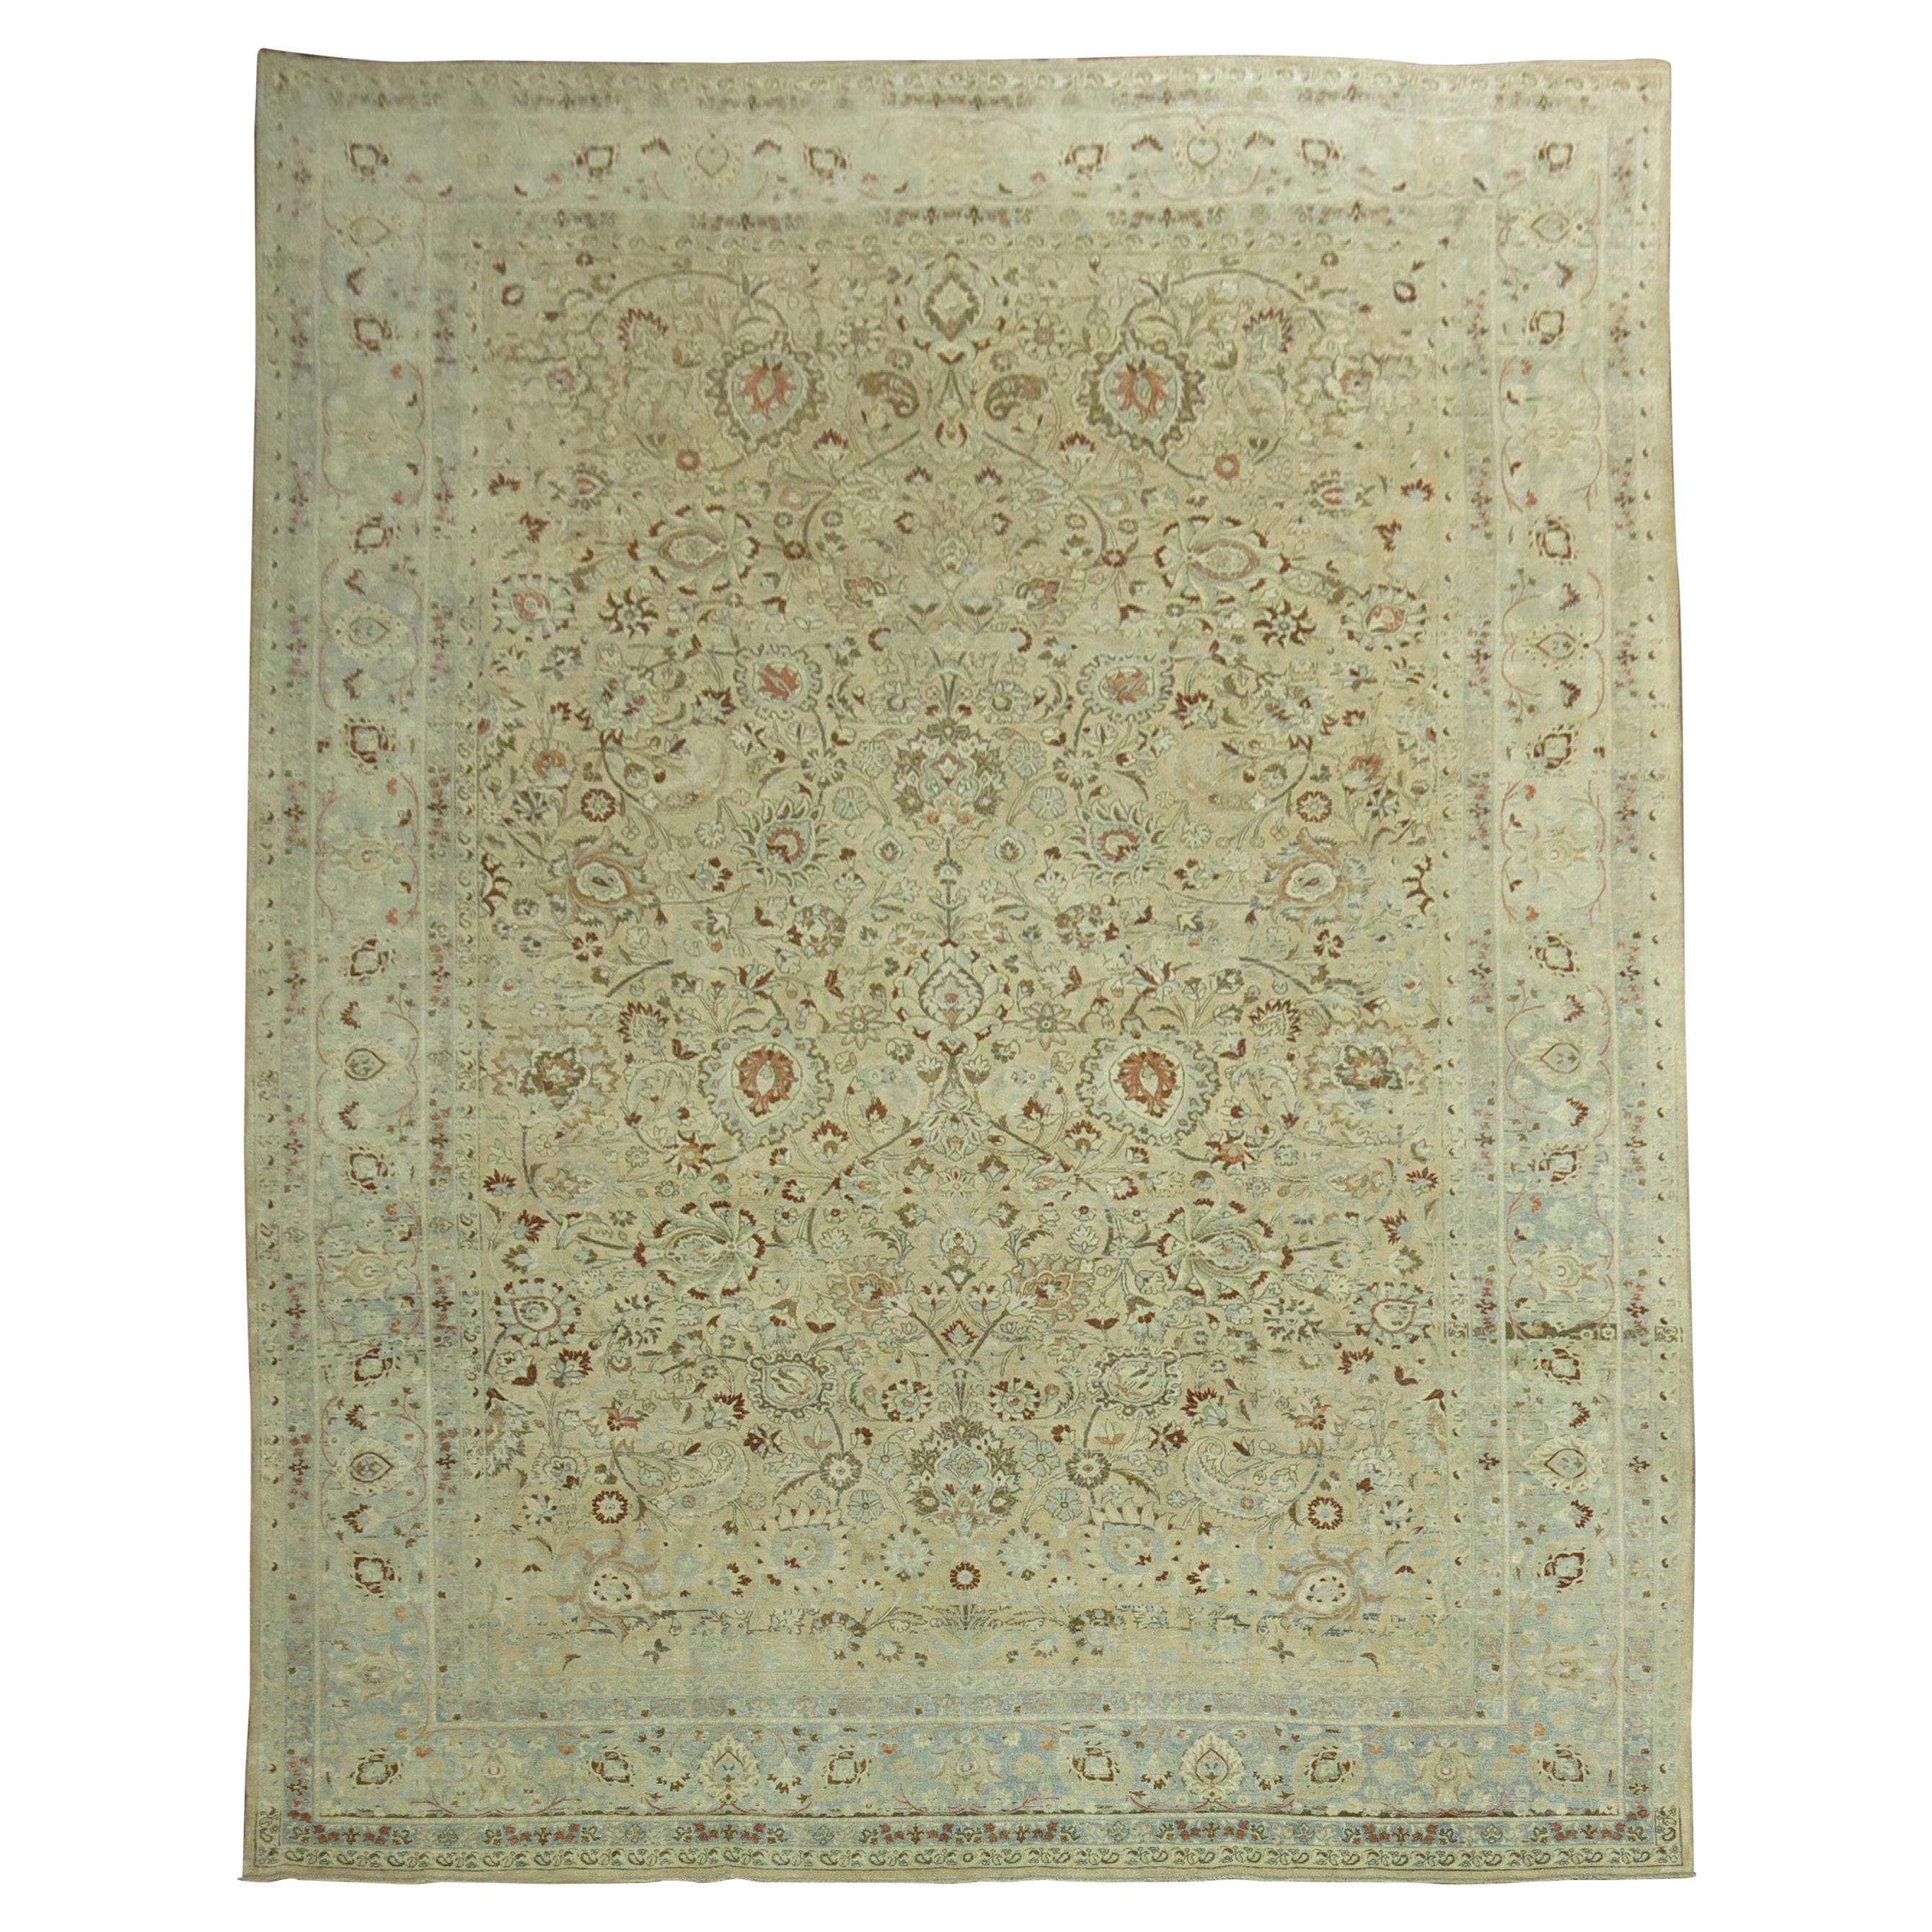 Stunning Tan Icy Blue Antique Persian Formal Meshed Rug, 20th Century For Sale